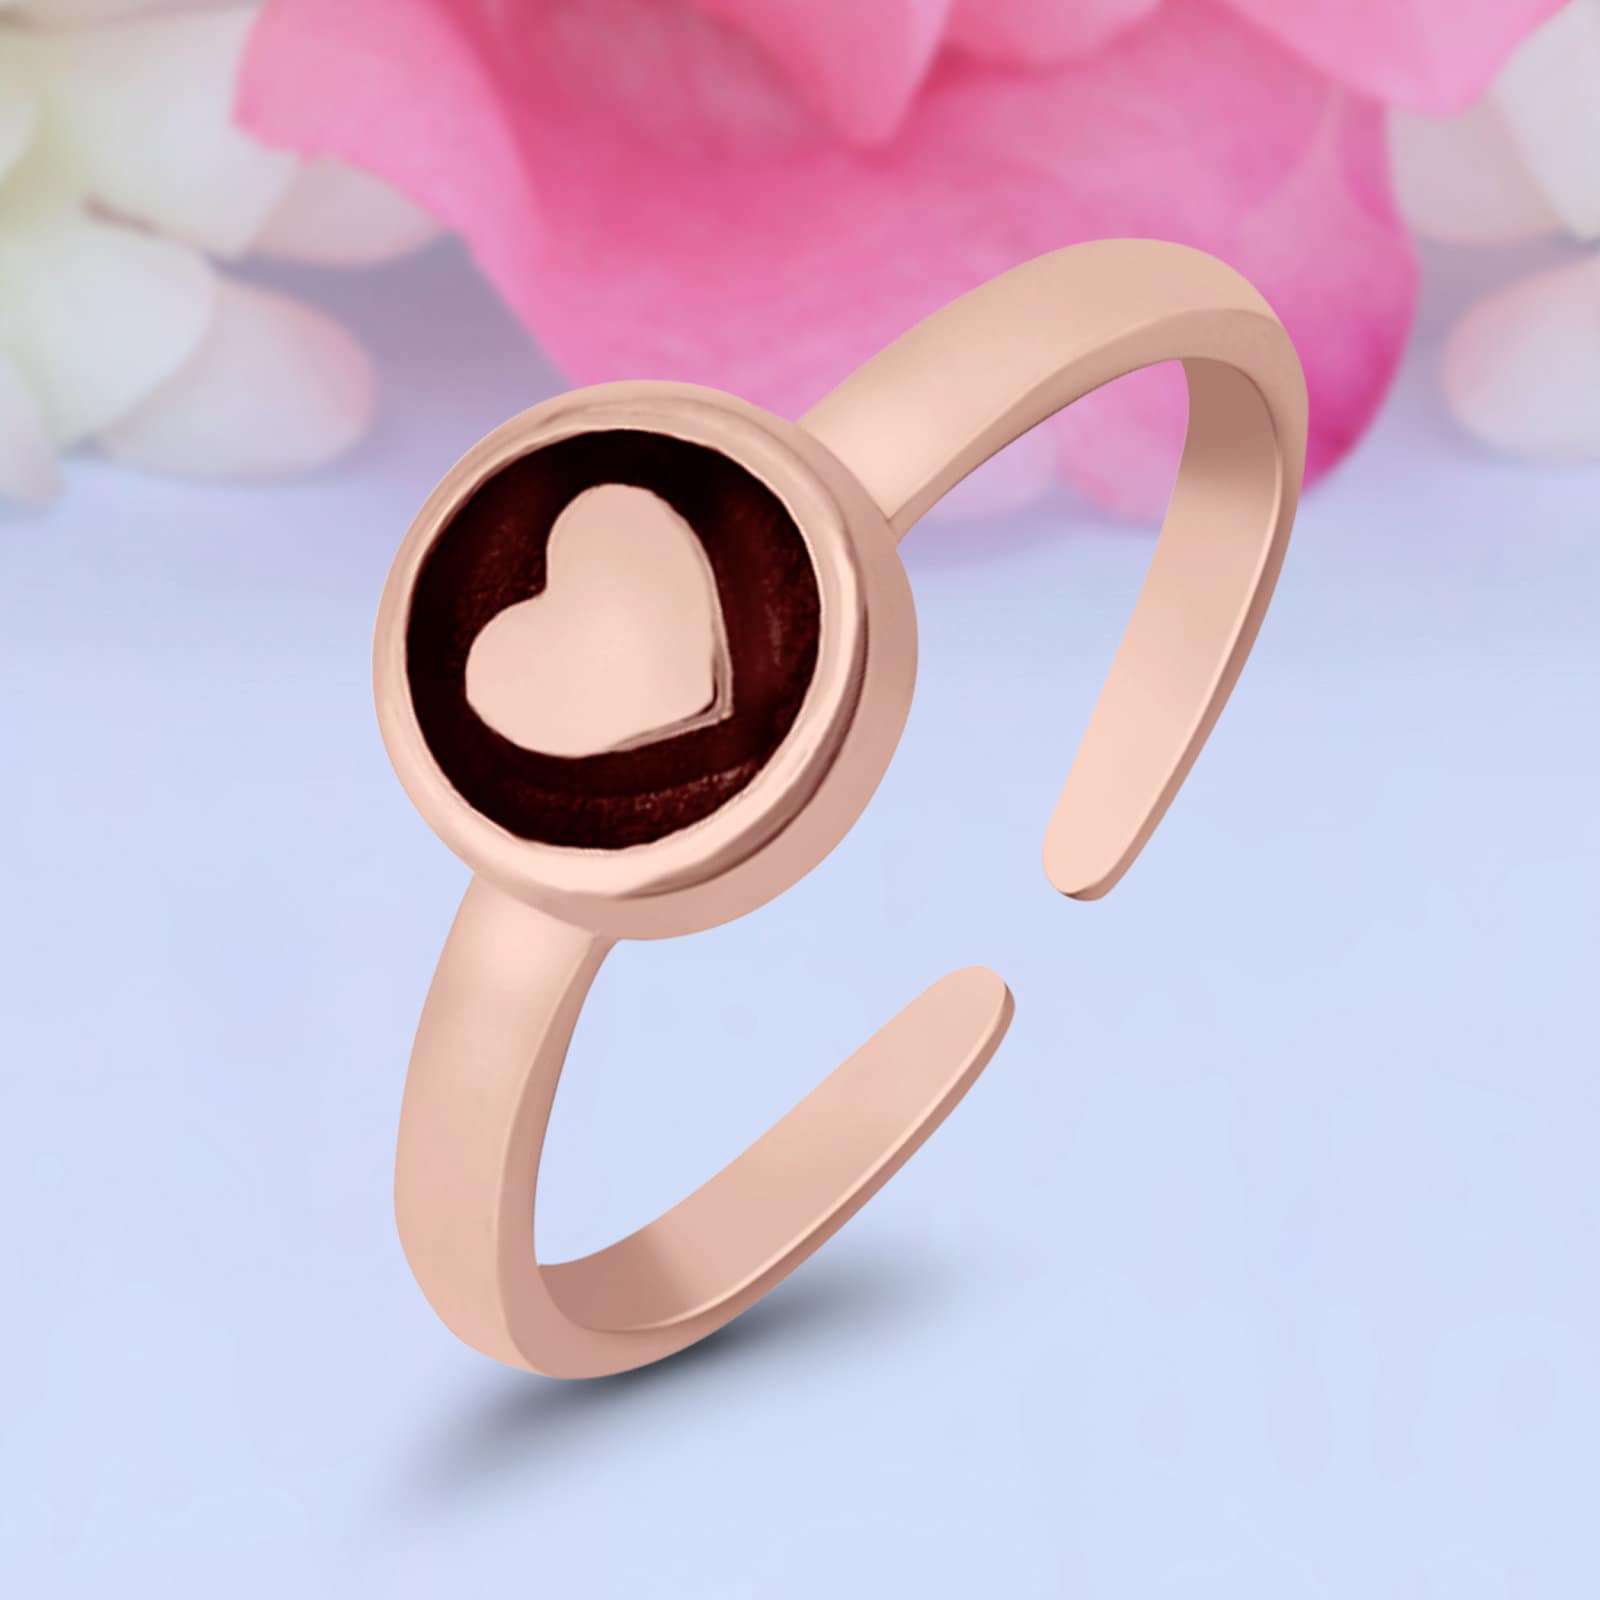 6.5 mm Heart Toe Ring Band 925 Sterling Silver Free Size Ring Rose Gold Yellow Gold Black Toe Ring Jewelry Summer